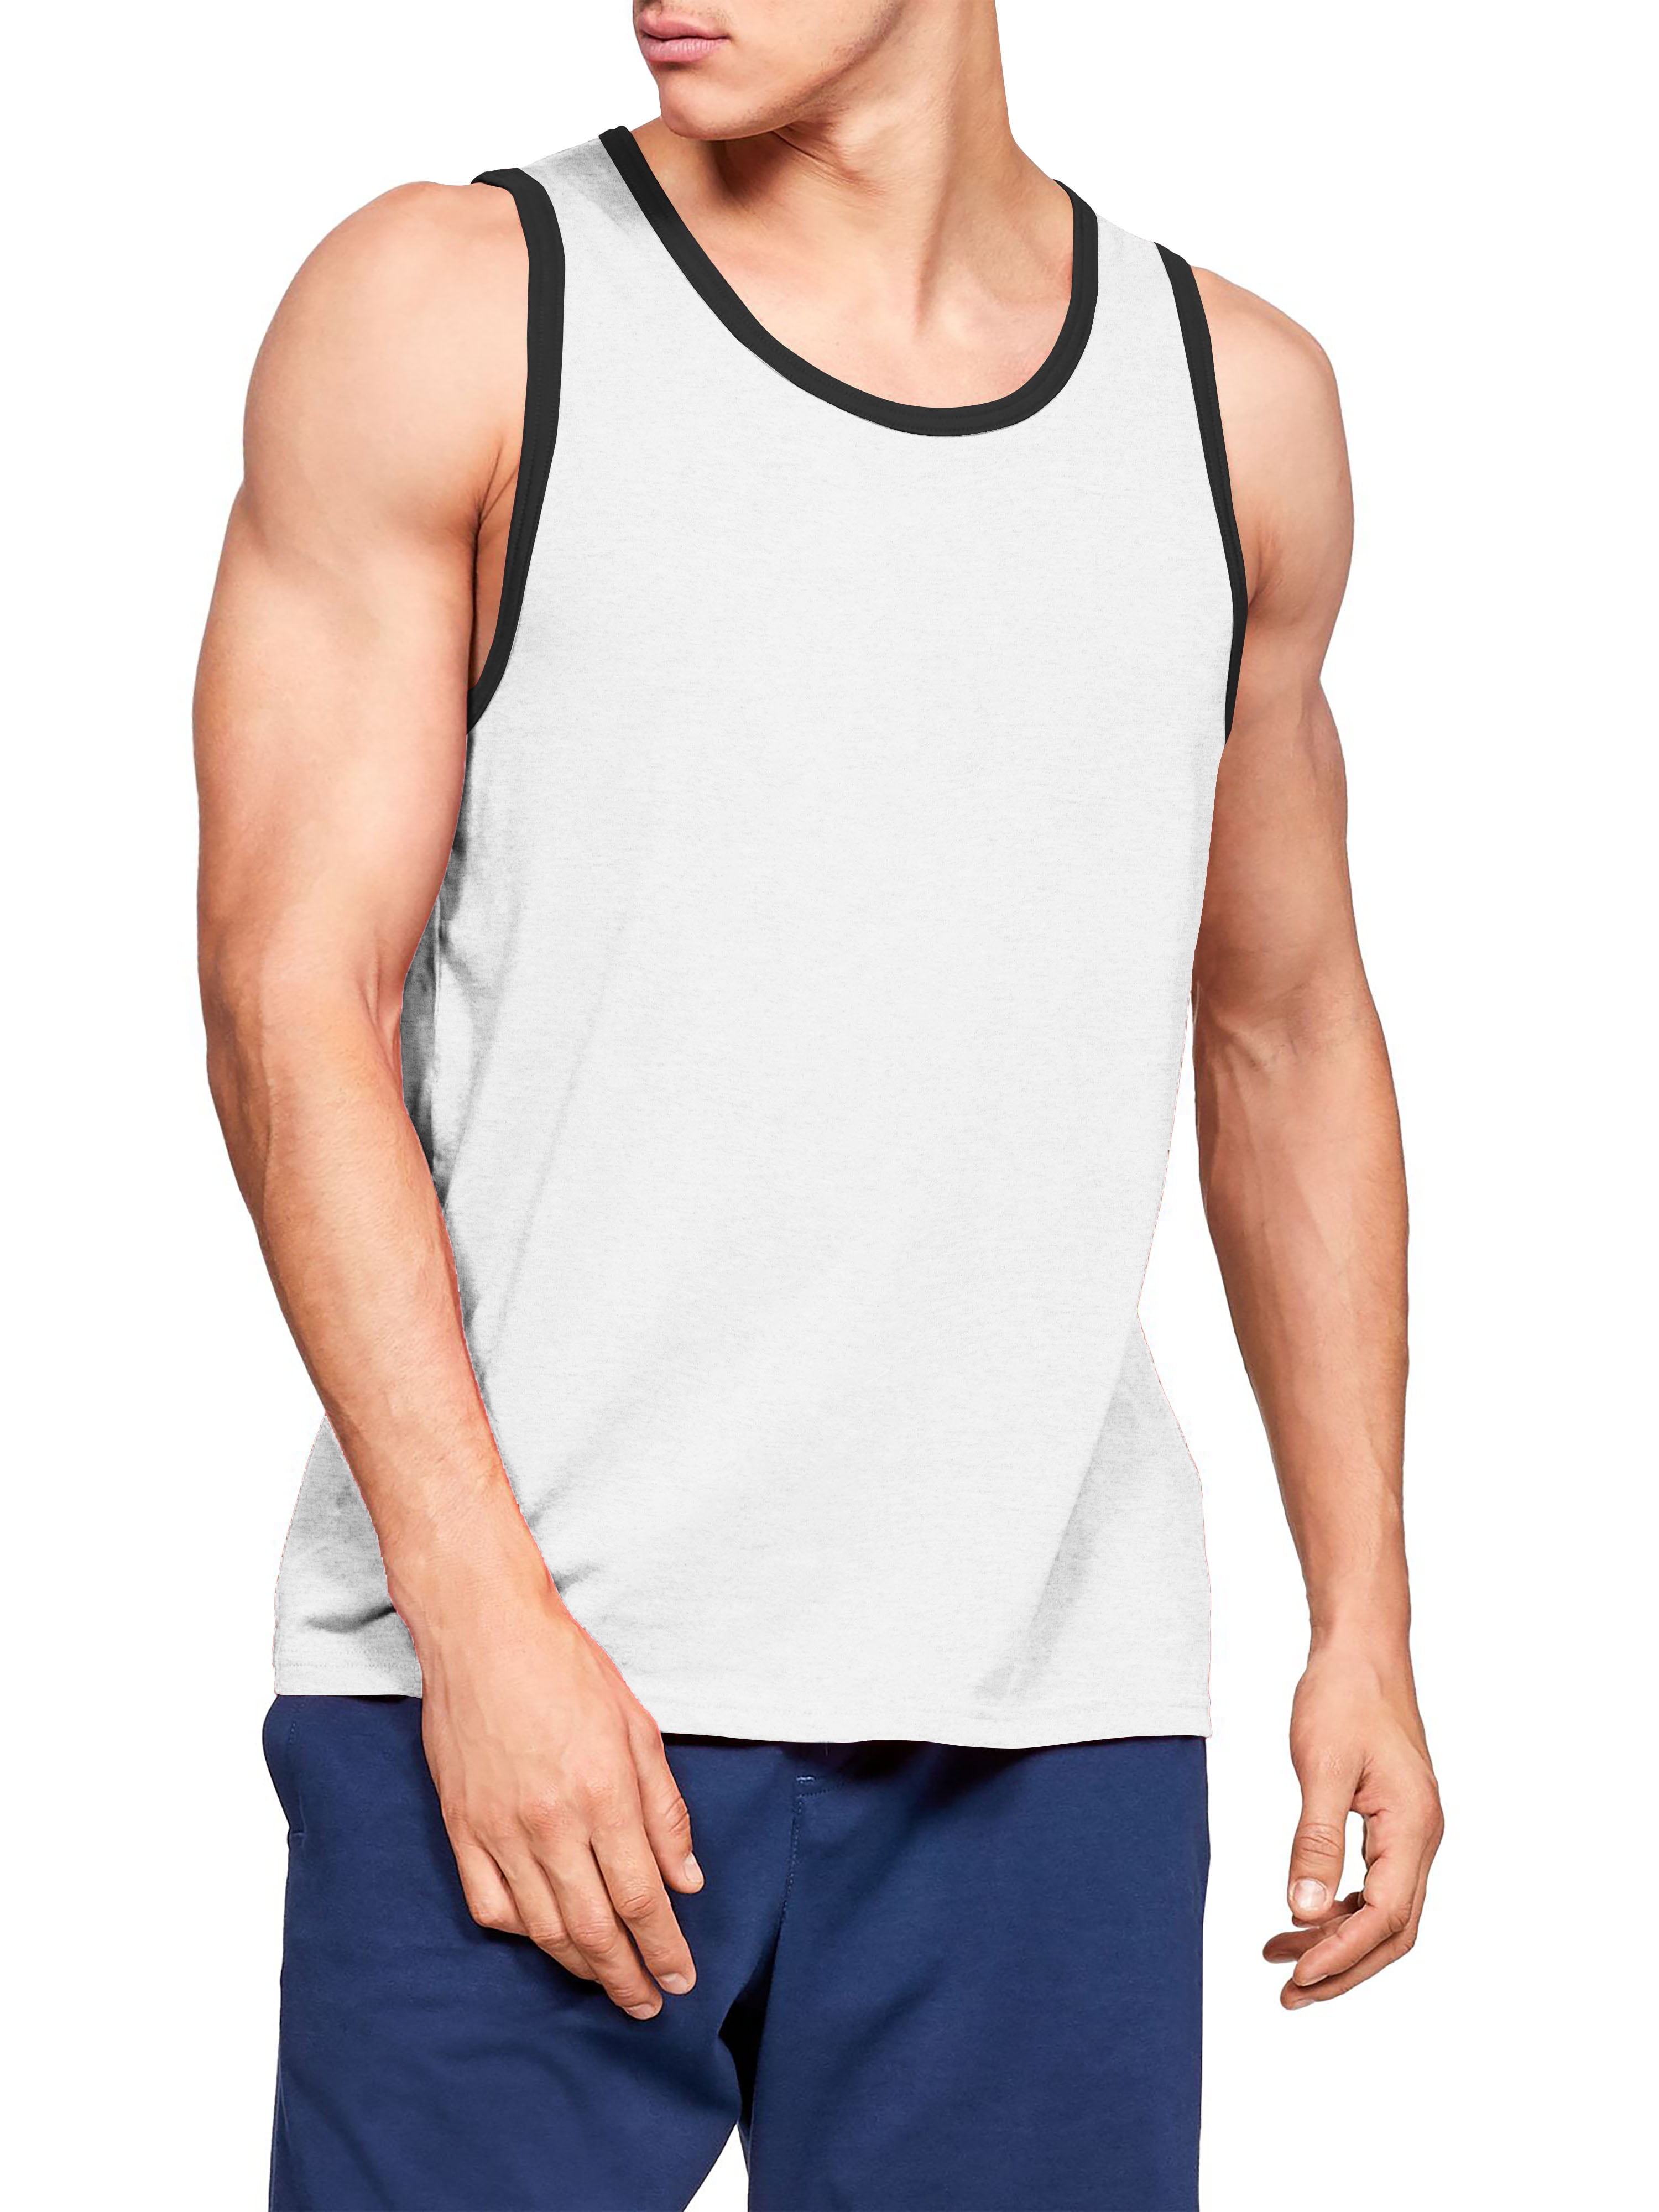 Ma Croix Men's Sleeveless Tee Shirts with Contrast Binding Athletic ...